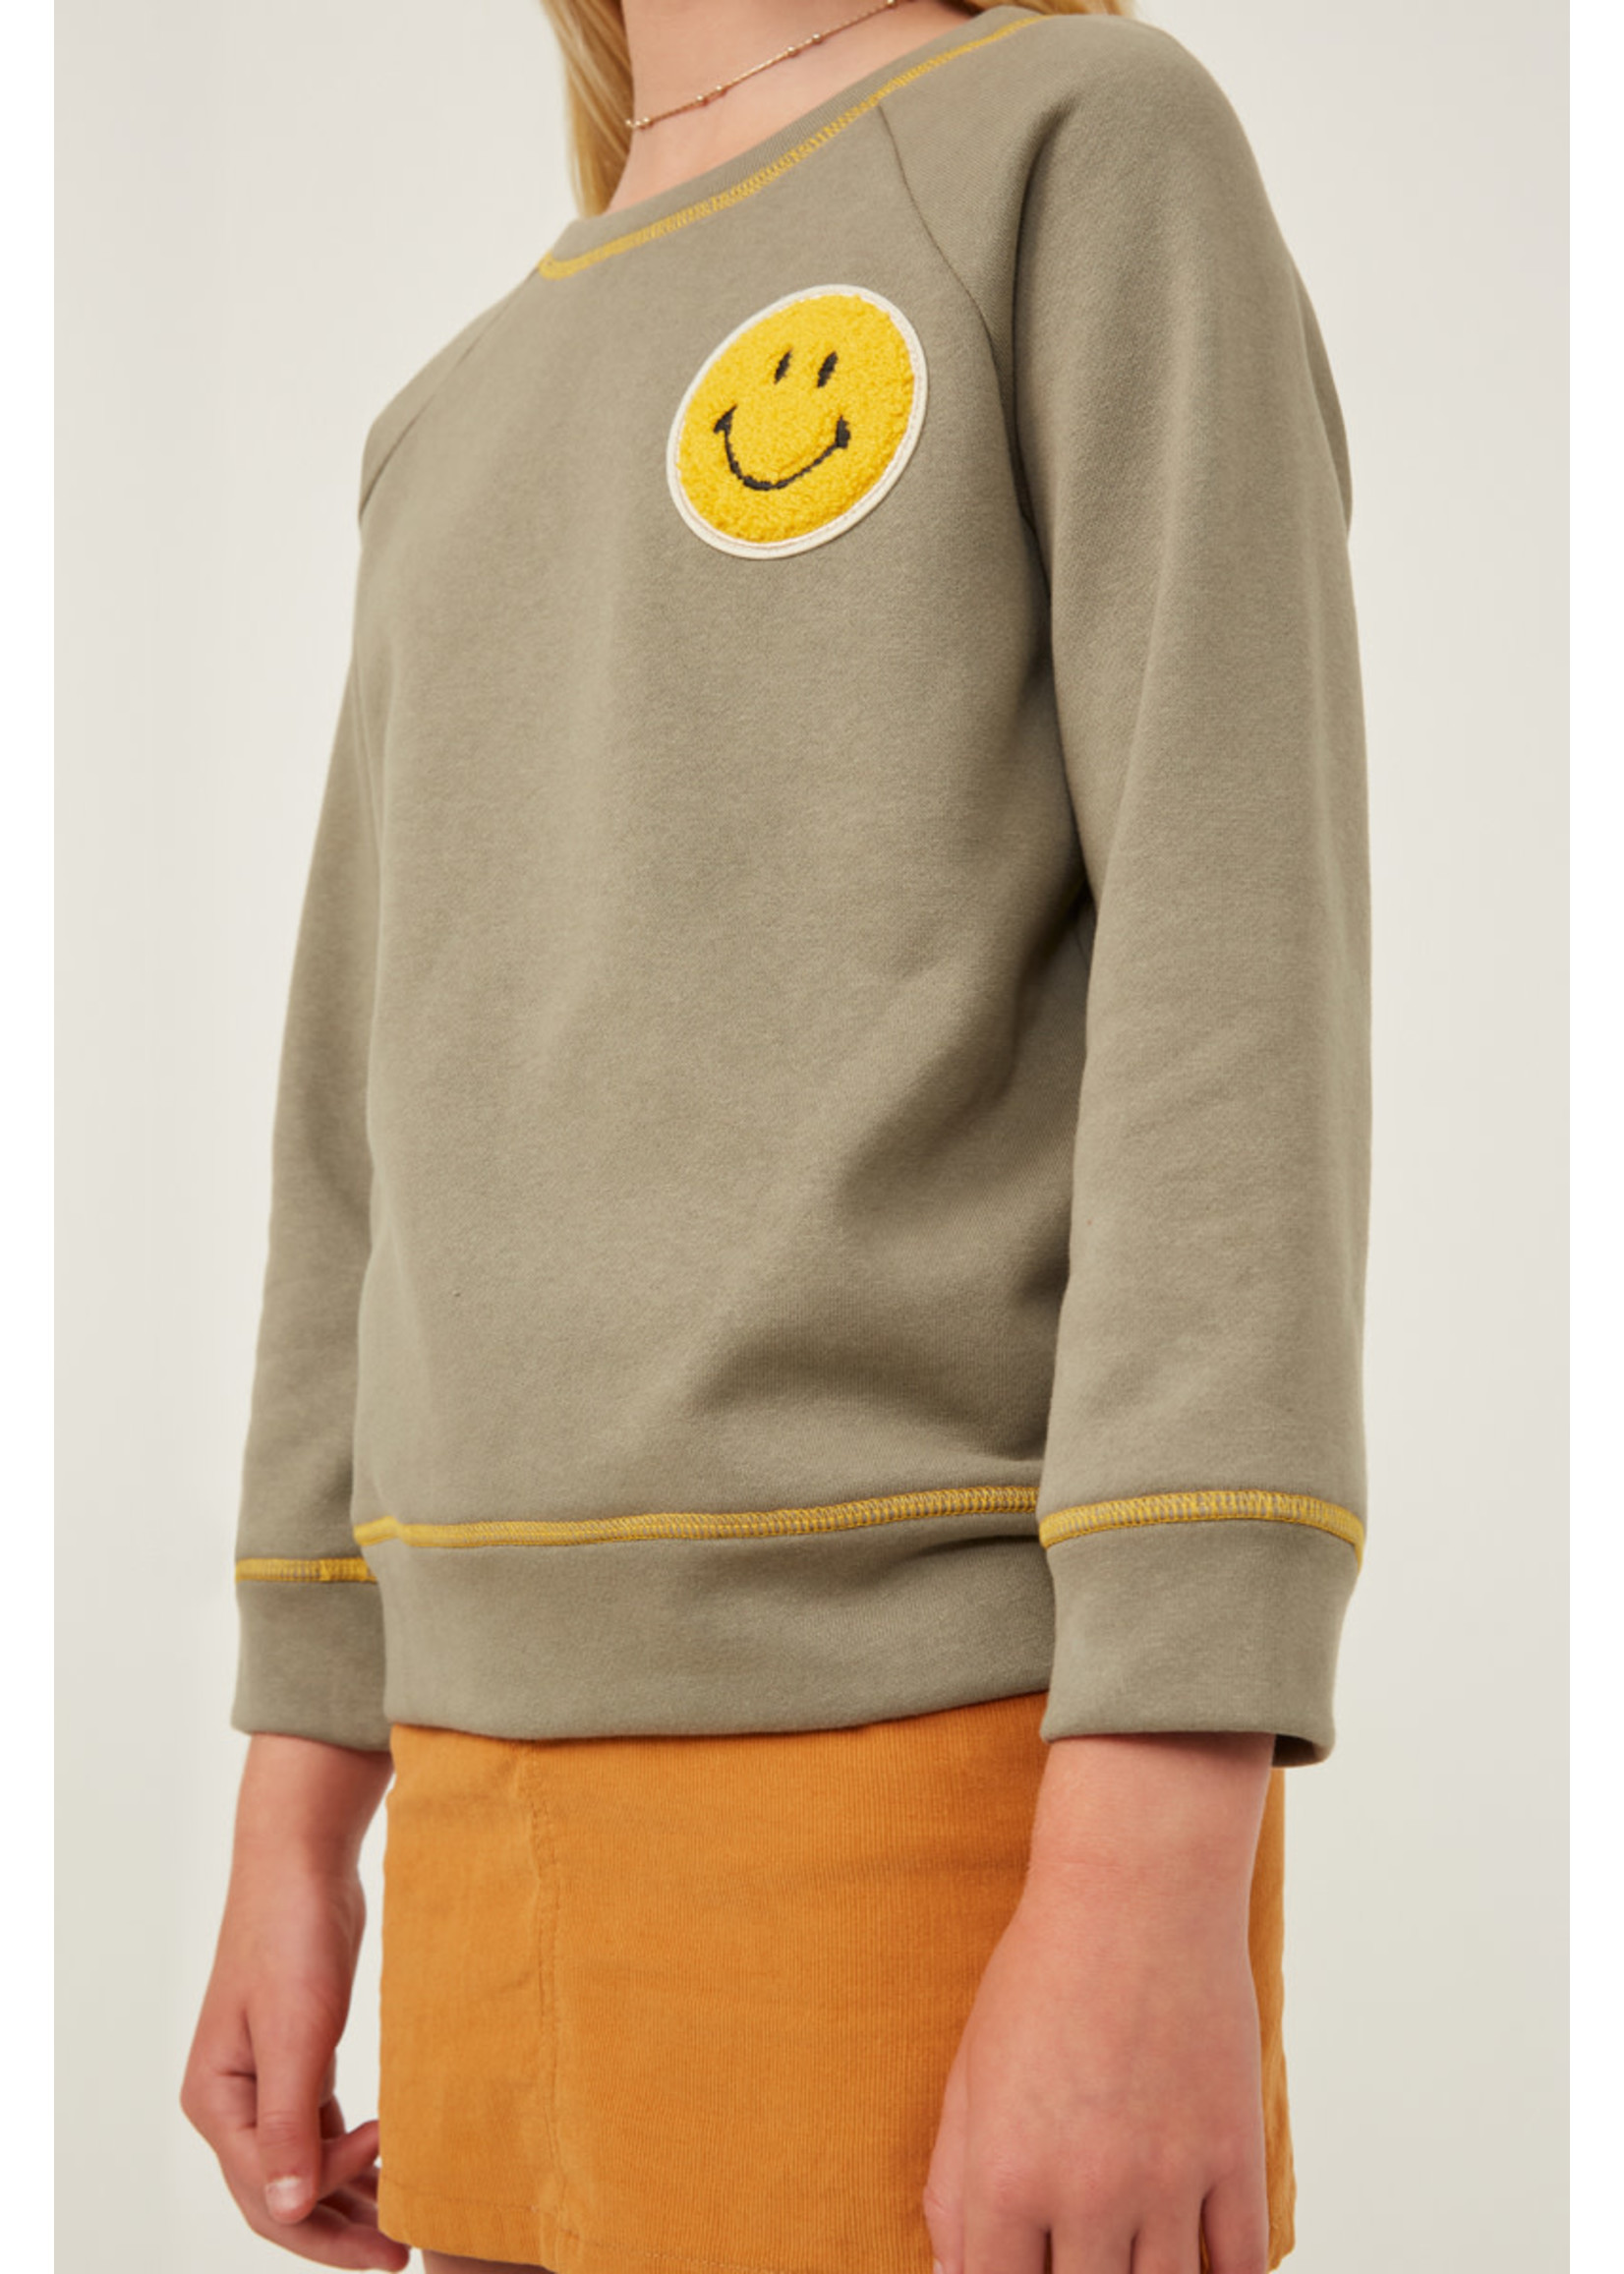 Hayden Girl Olive Smiley Patch French Terry Sweatshirt